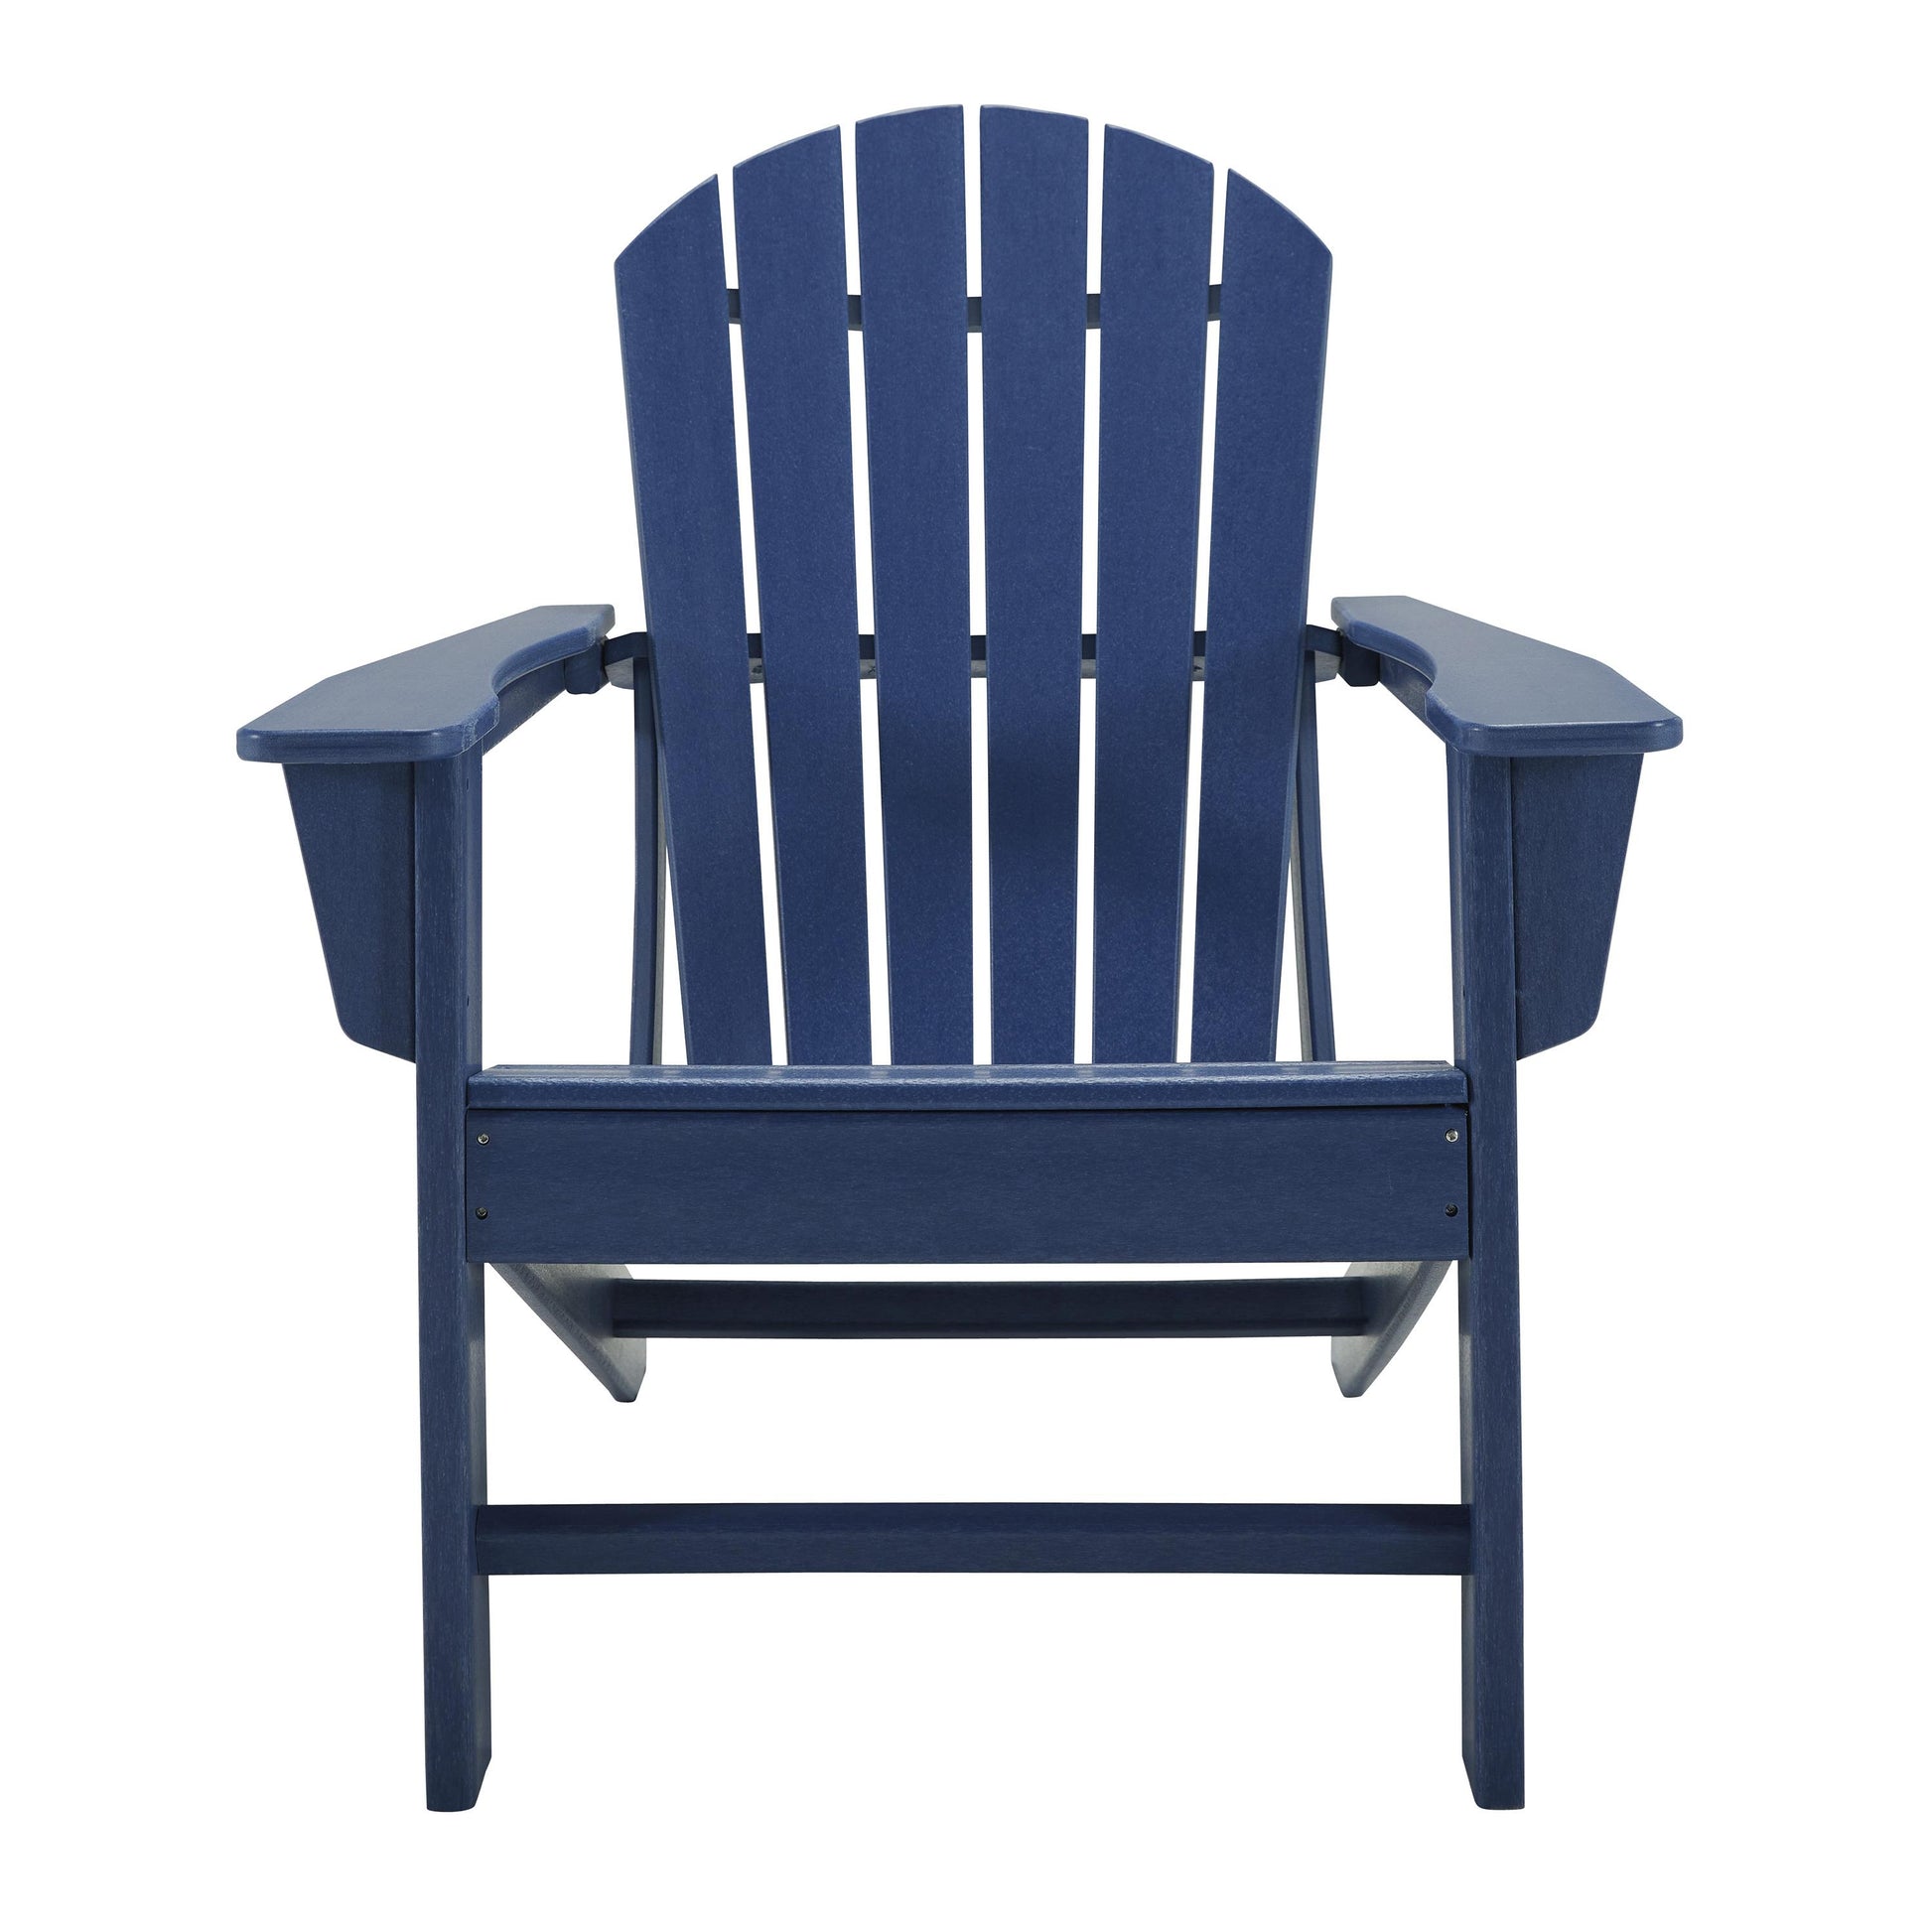 Signature Design by Ashley Outdoor Seating Adirondack Chairs P009-898 IMAGE 2